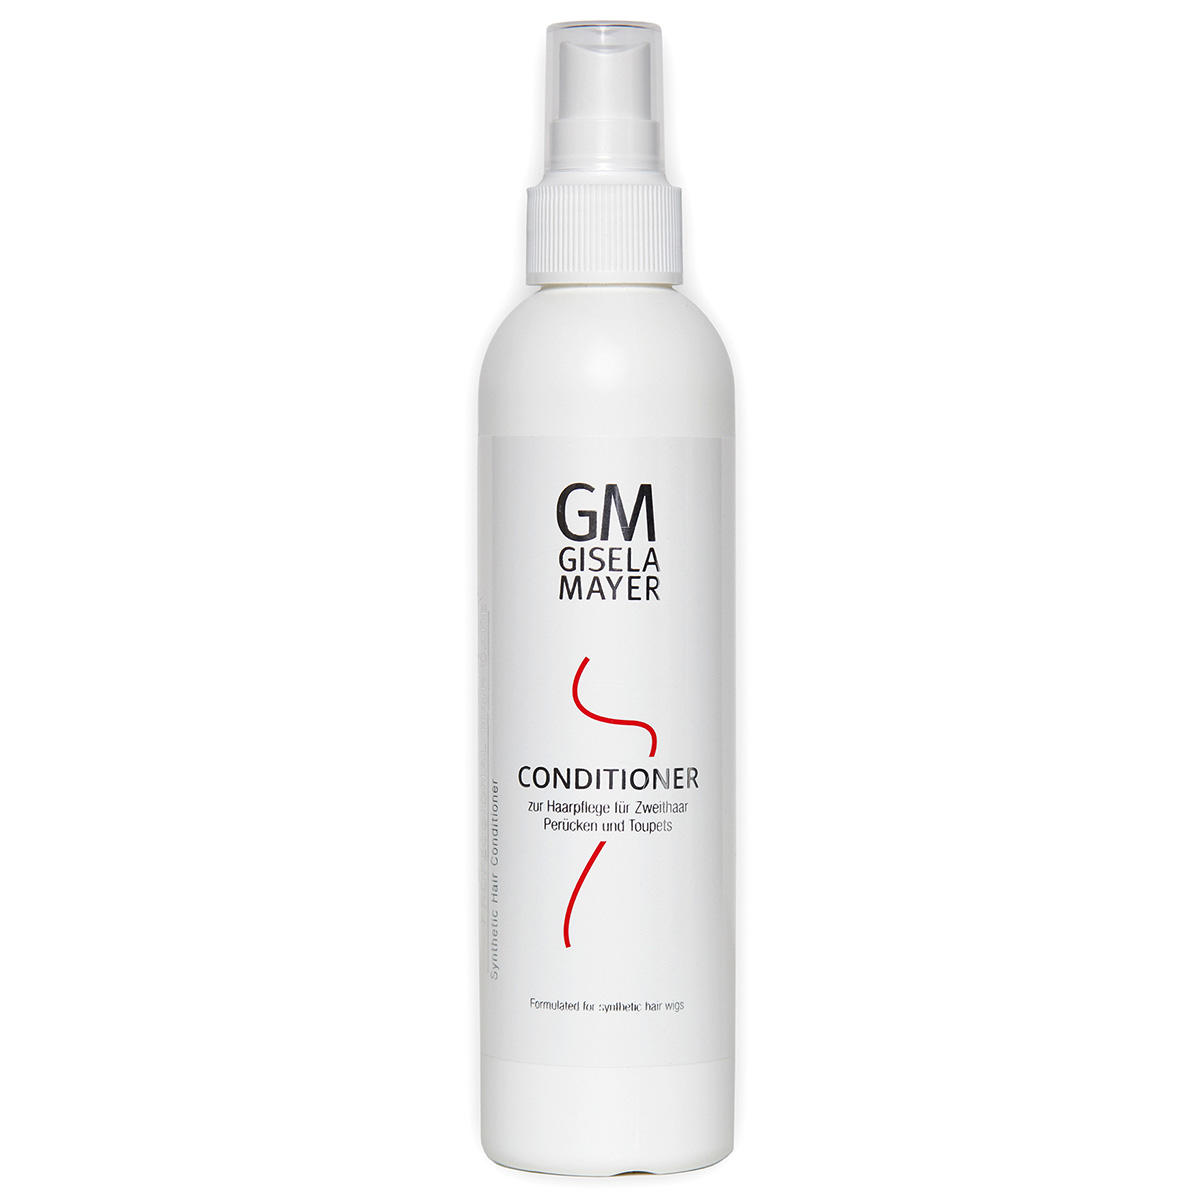 Gisela Mayer Conditioner for synthetic hair 200 ml - 1